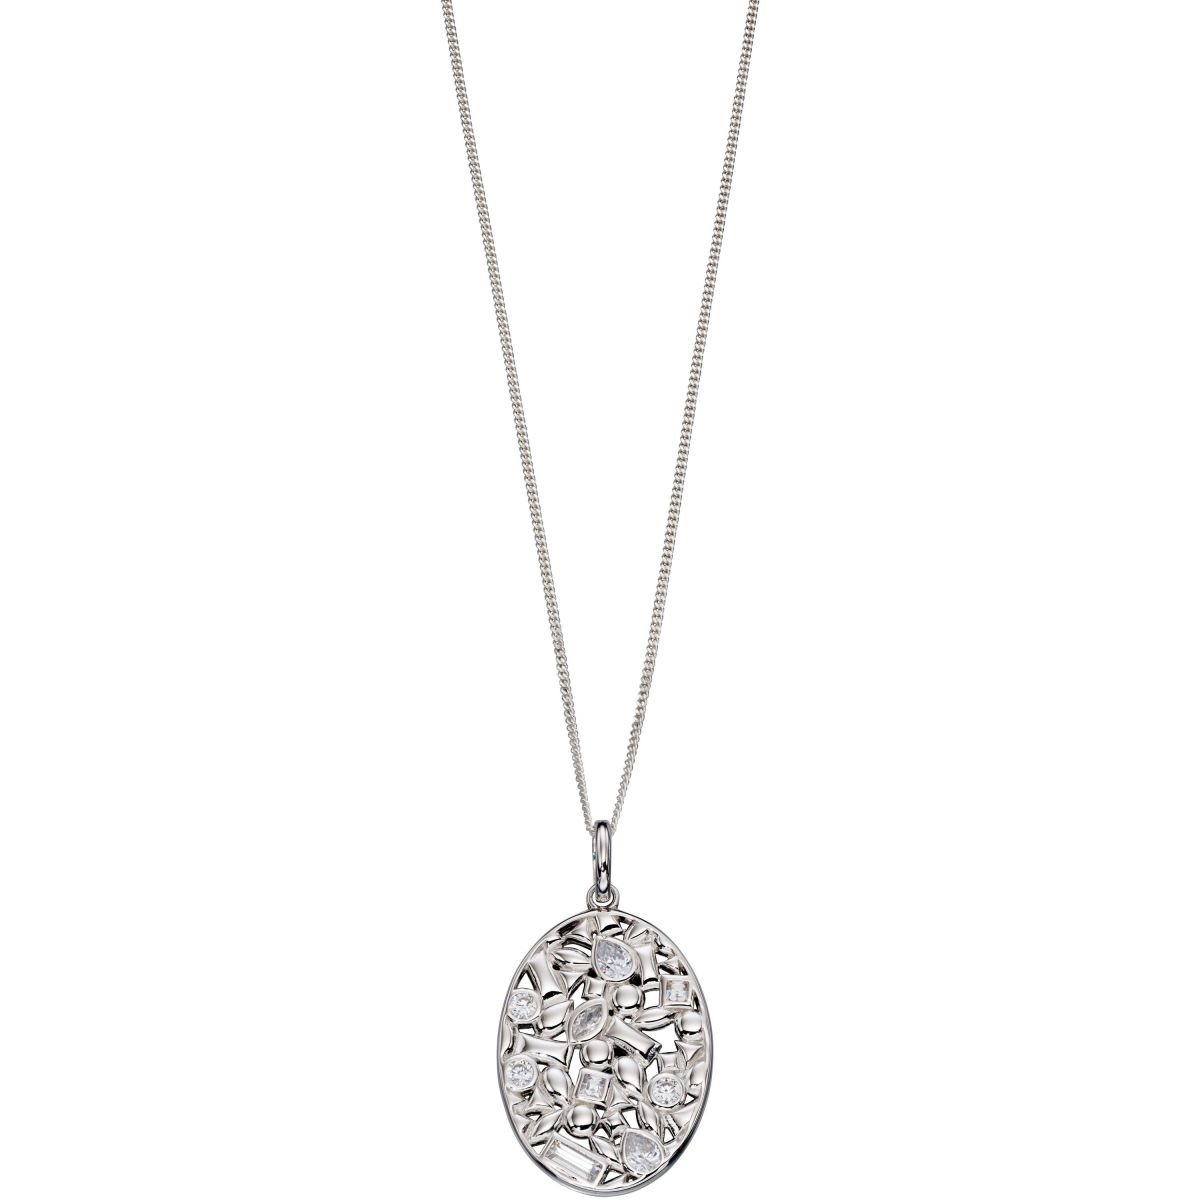 Watch Shop - Women's Necklace Silver from Elements GOOFASH